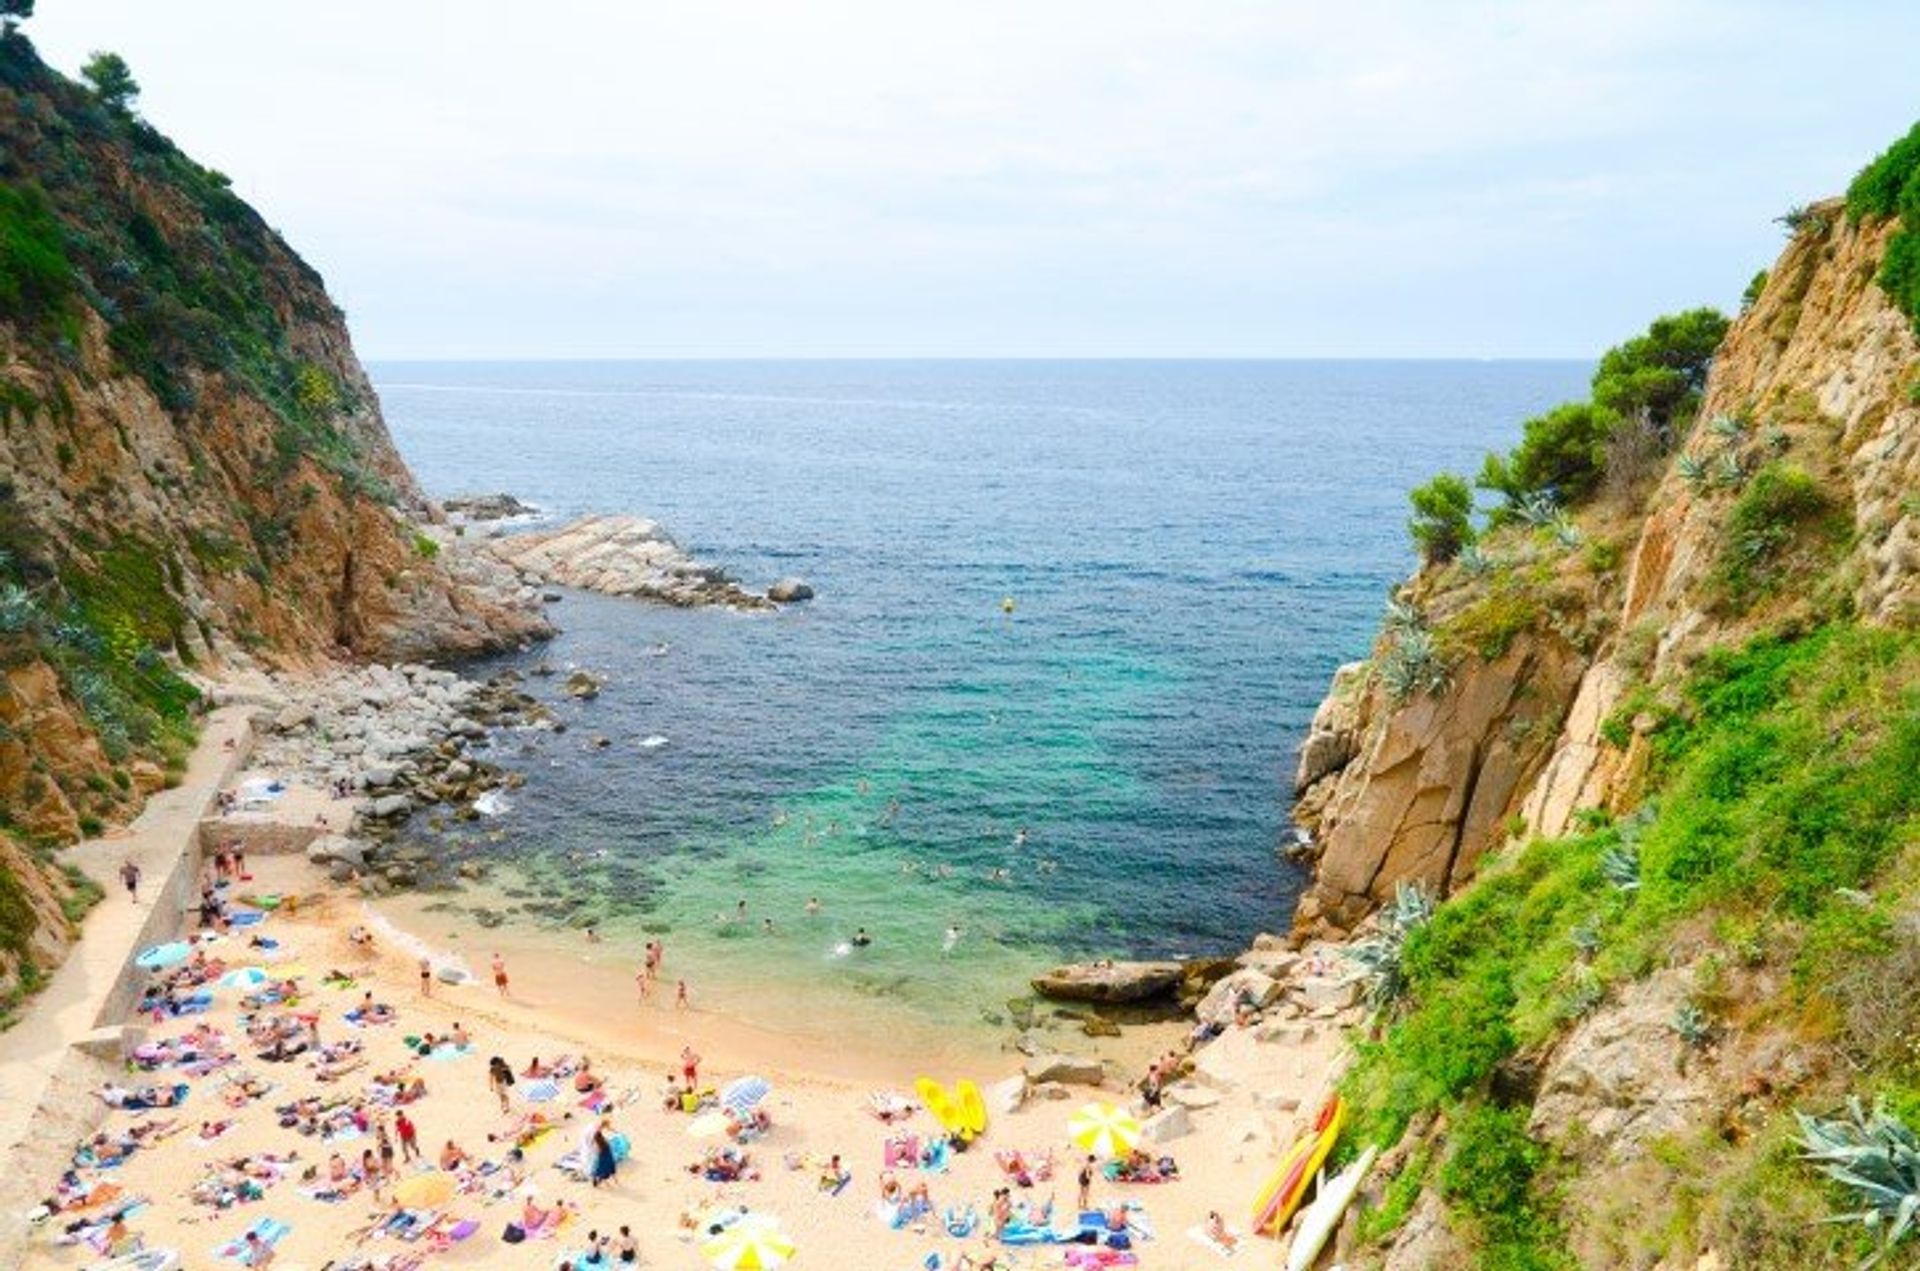 Es Codolar's sheltered cove is perfect for those seeking a more secluded spot